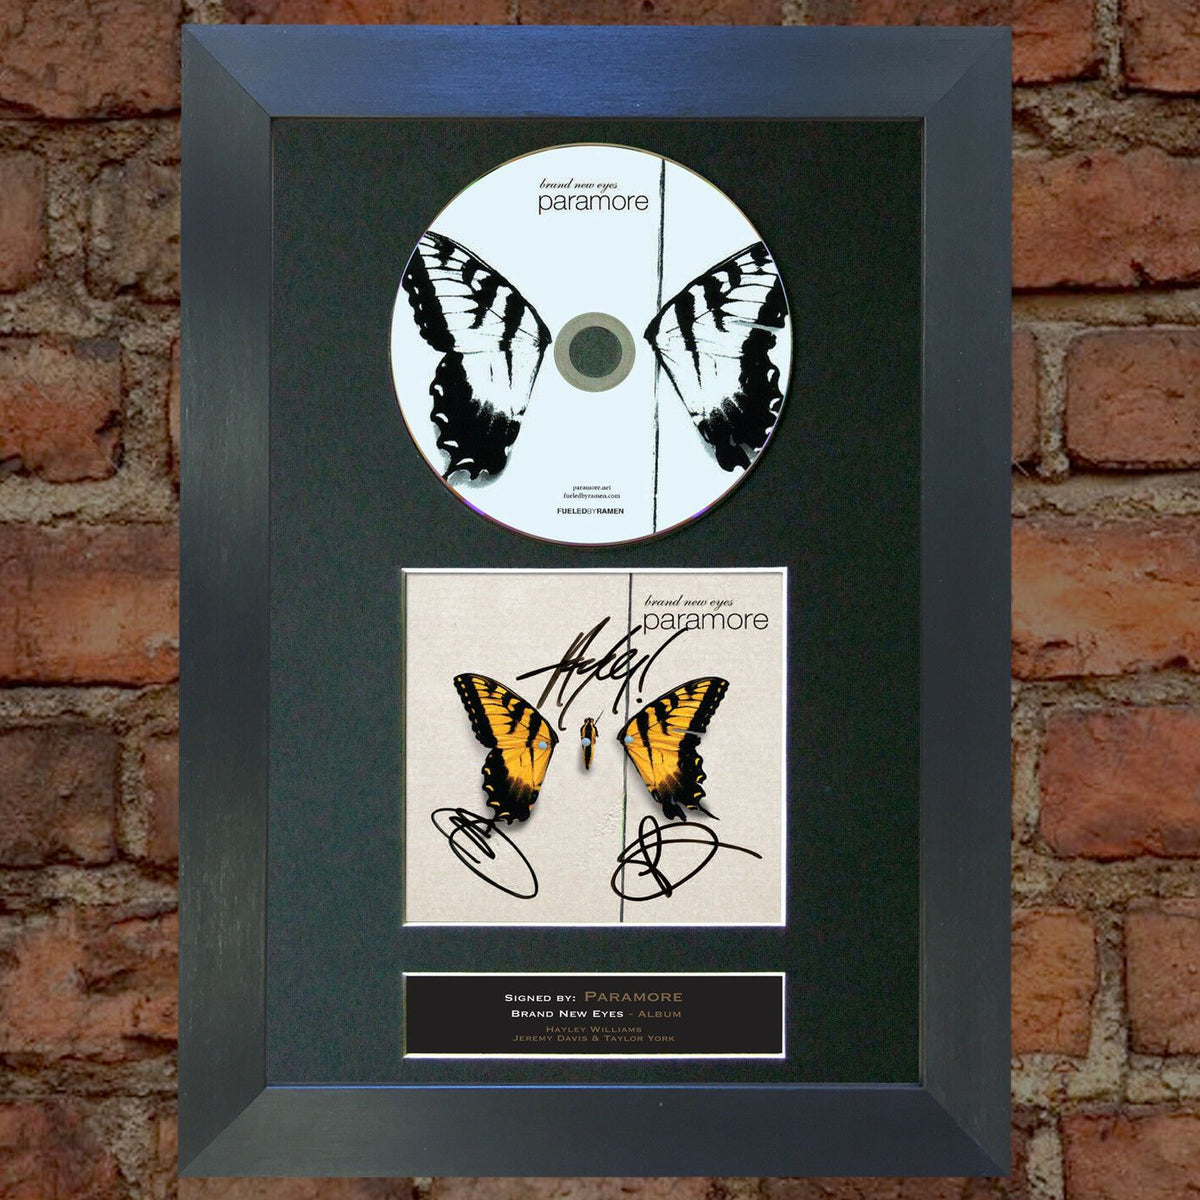  Paramore SIGNED VINYL Brand New Eyes - auction details